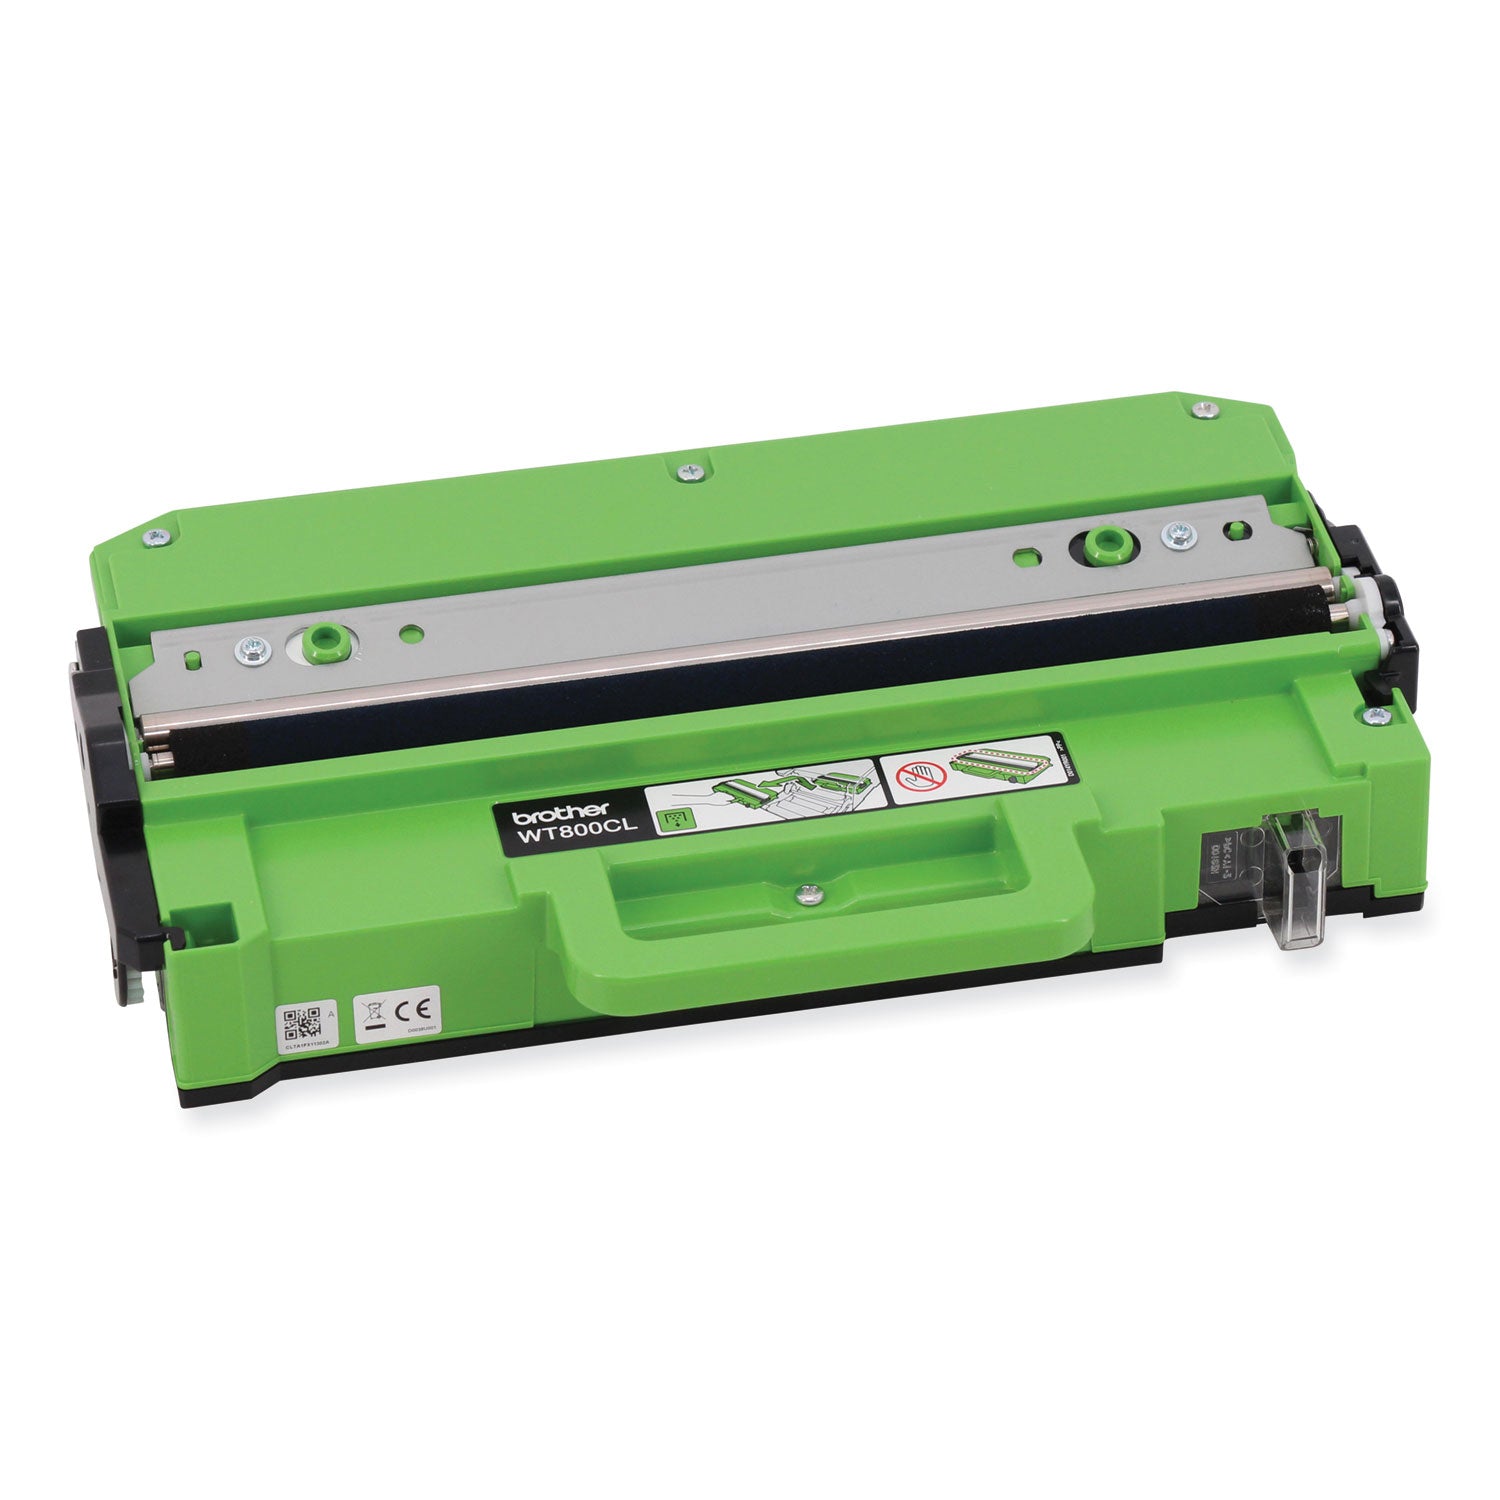 wt800cl-waste-toner-box-100000-page-yield_brtwt800cl - 3